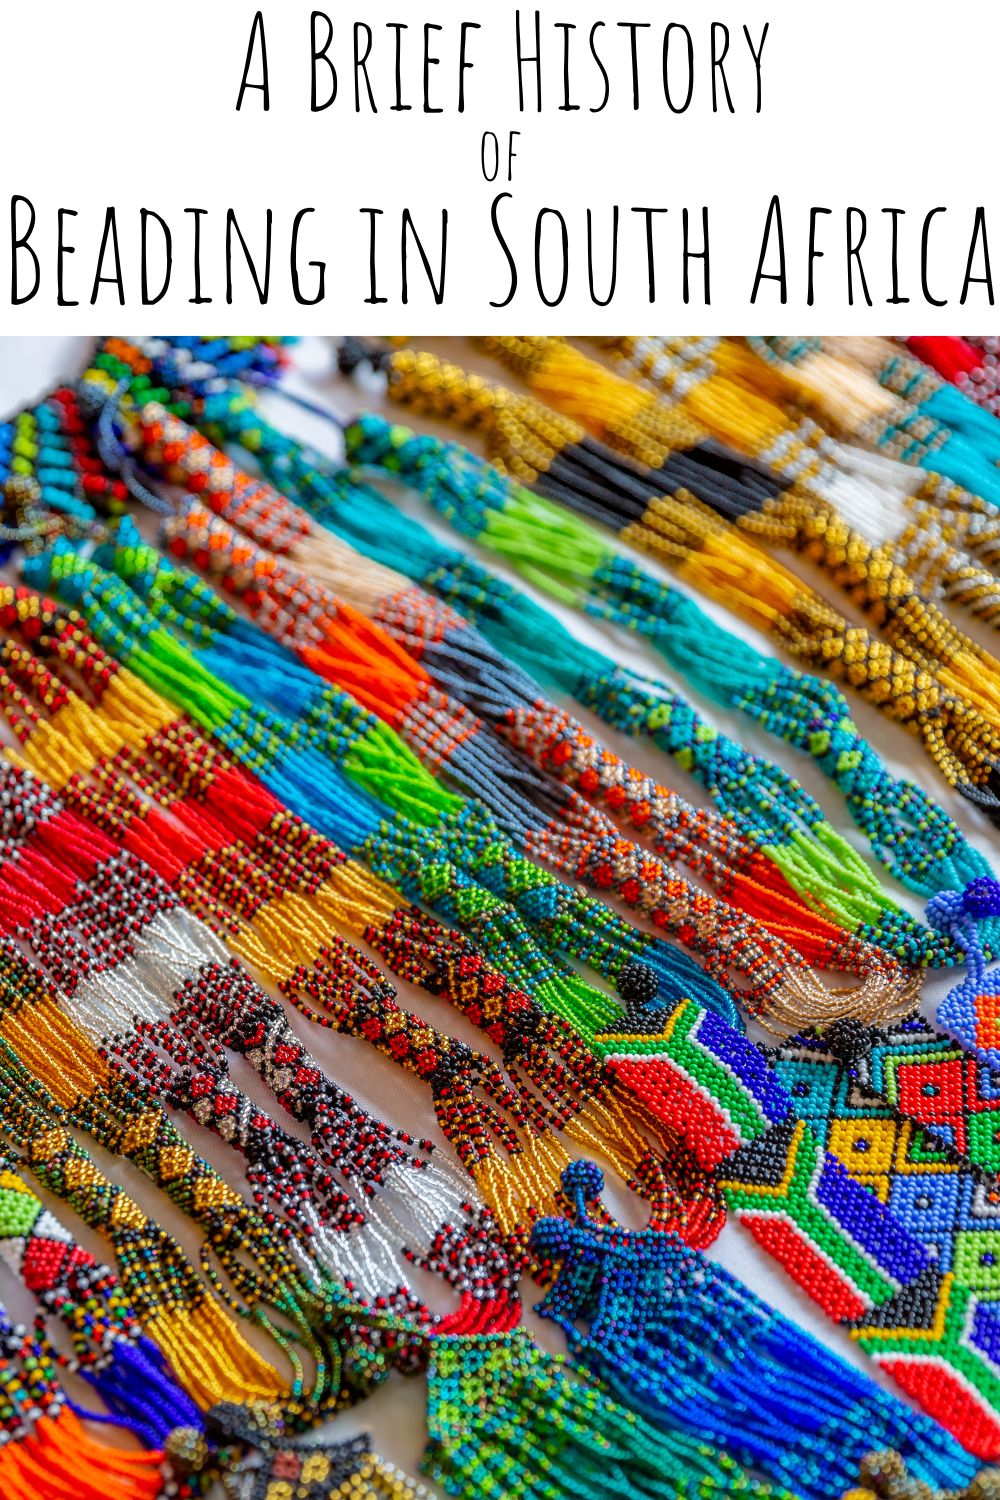 A Brief History of Beading in South Africa